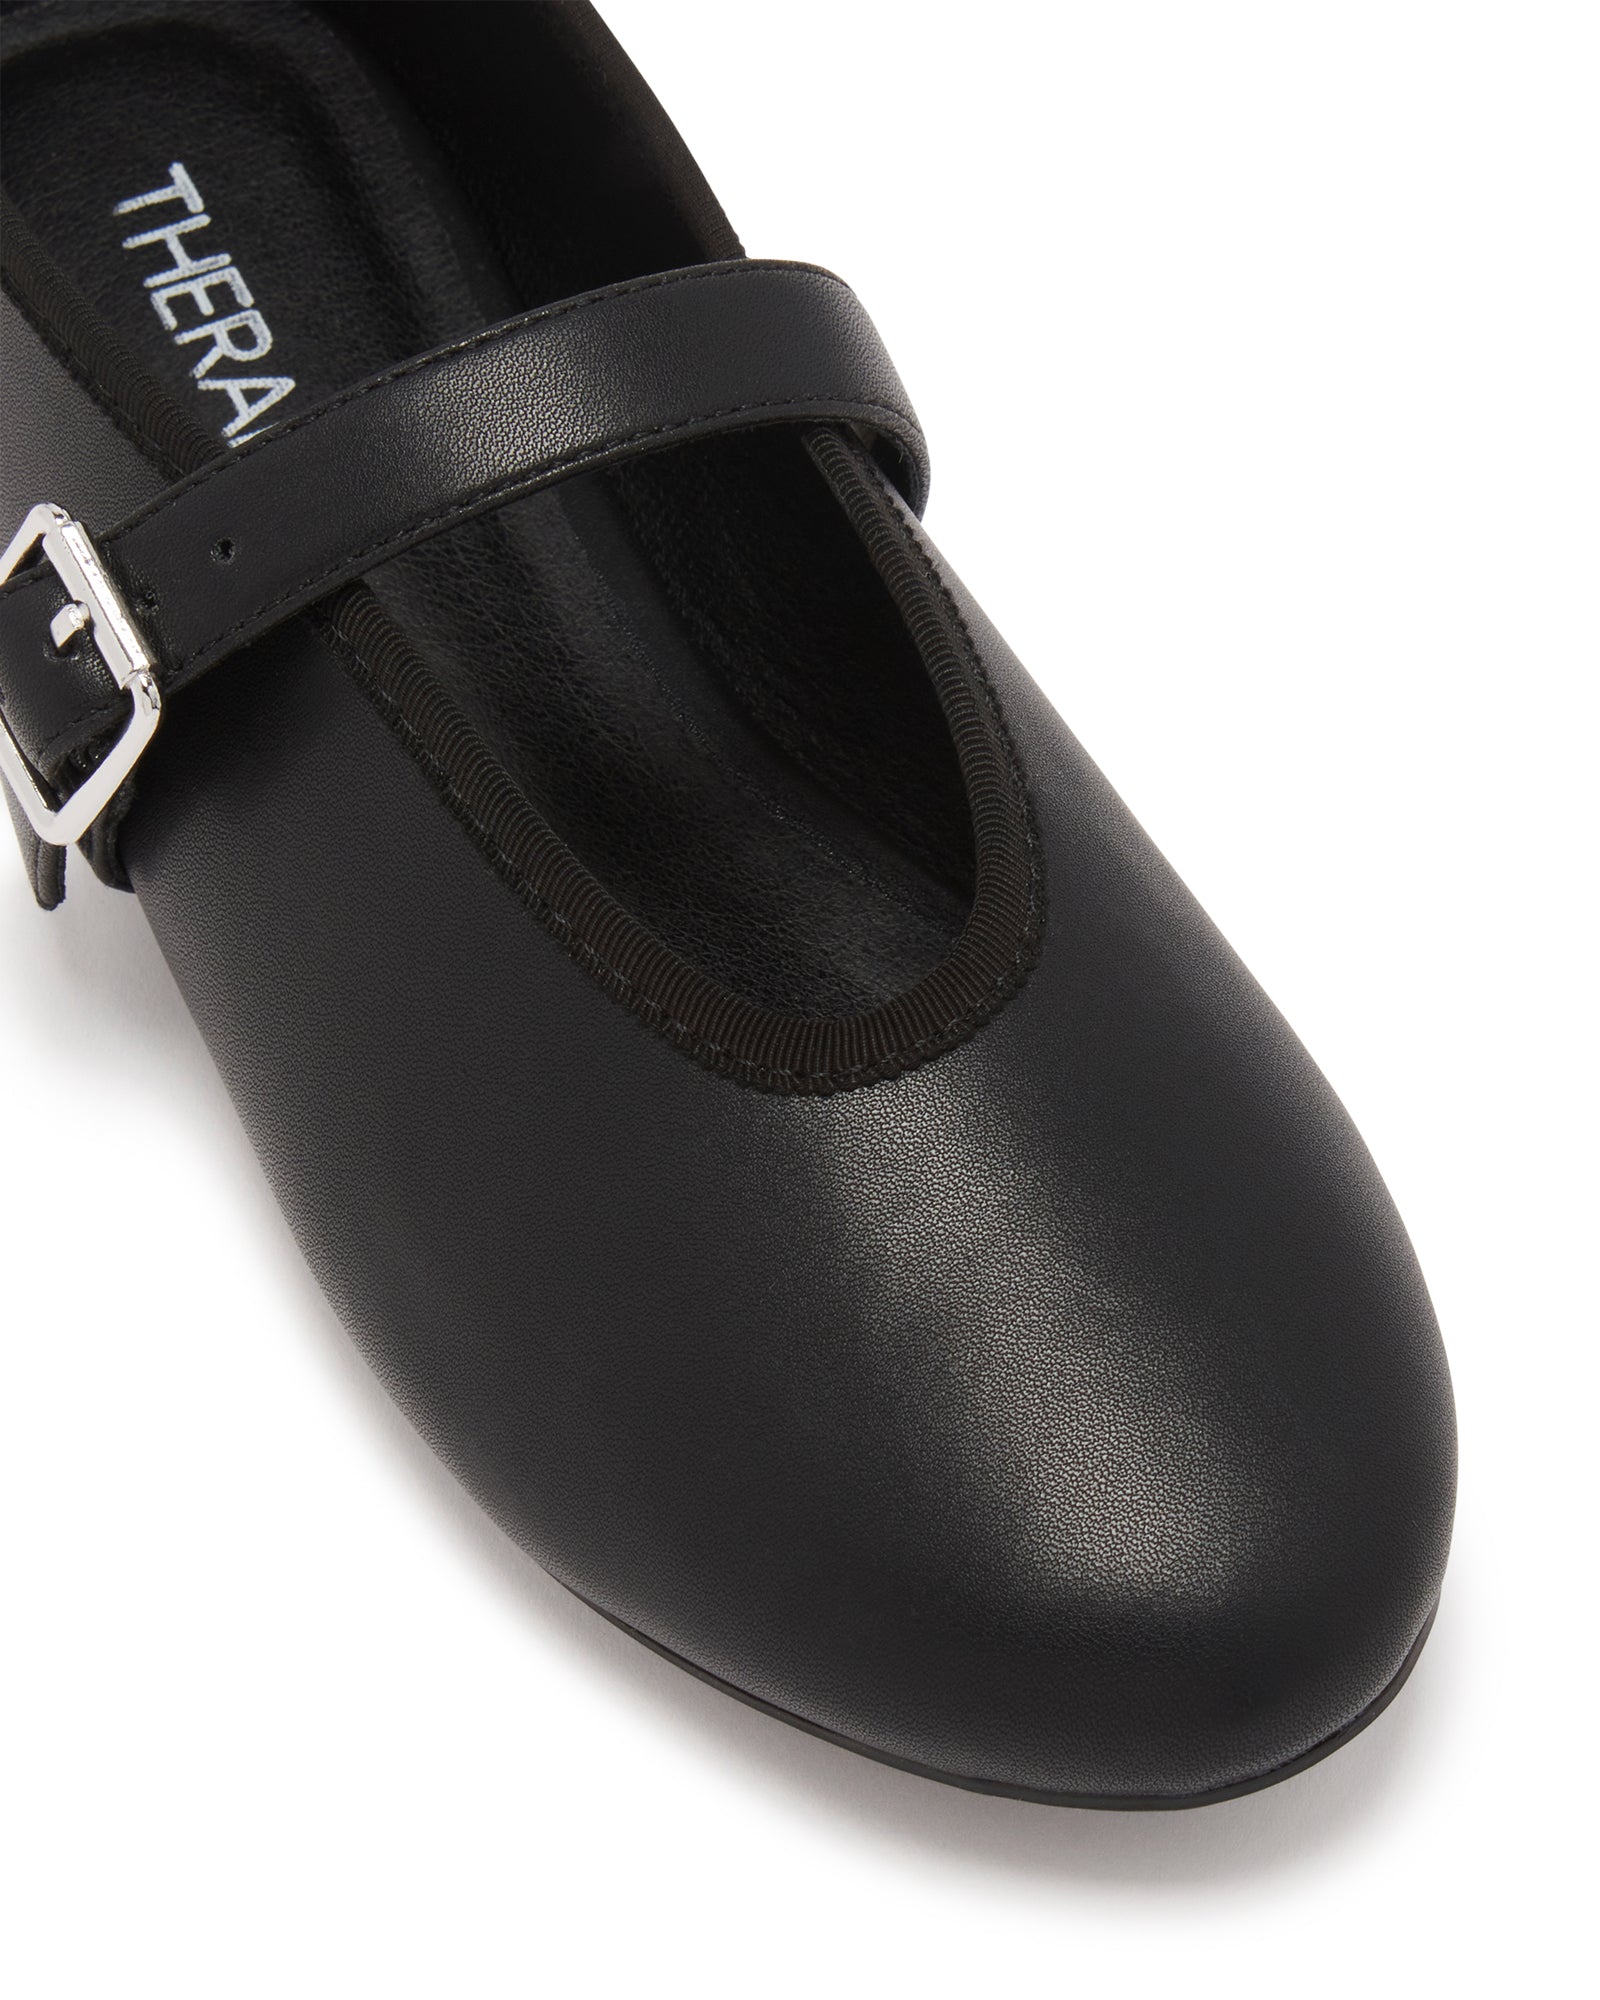 Therapy Shoes Amina Black Smooth | Women's Flat | Ballet | Round Toe